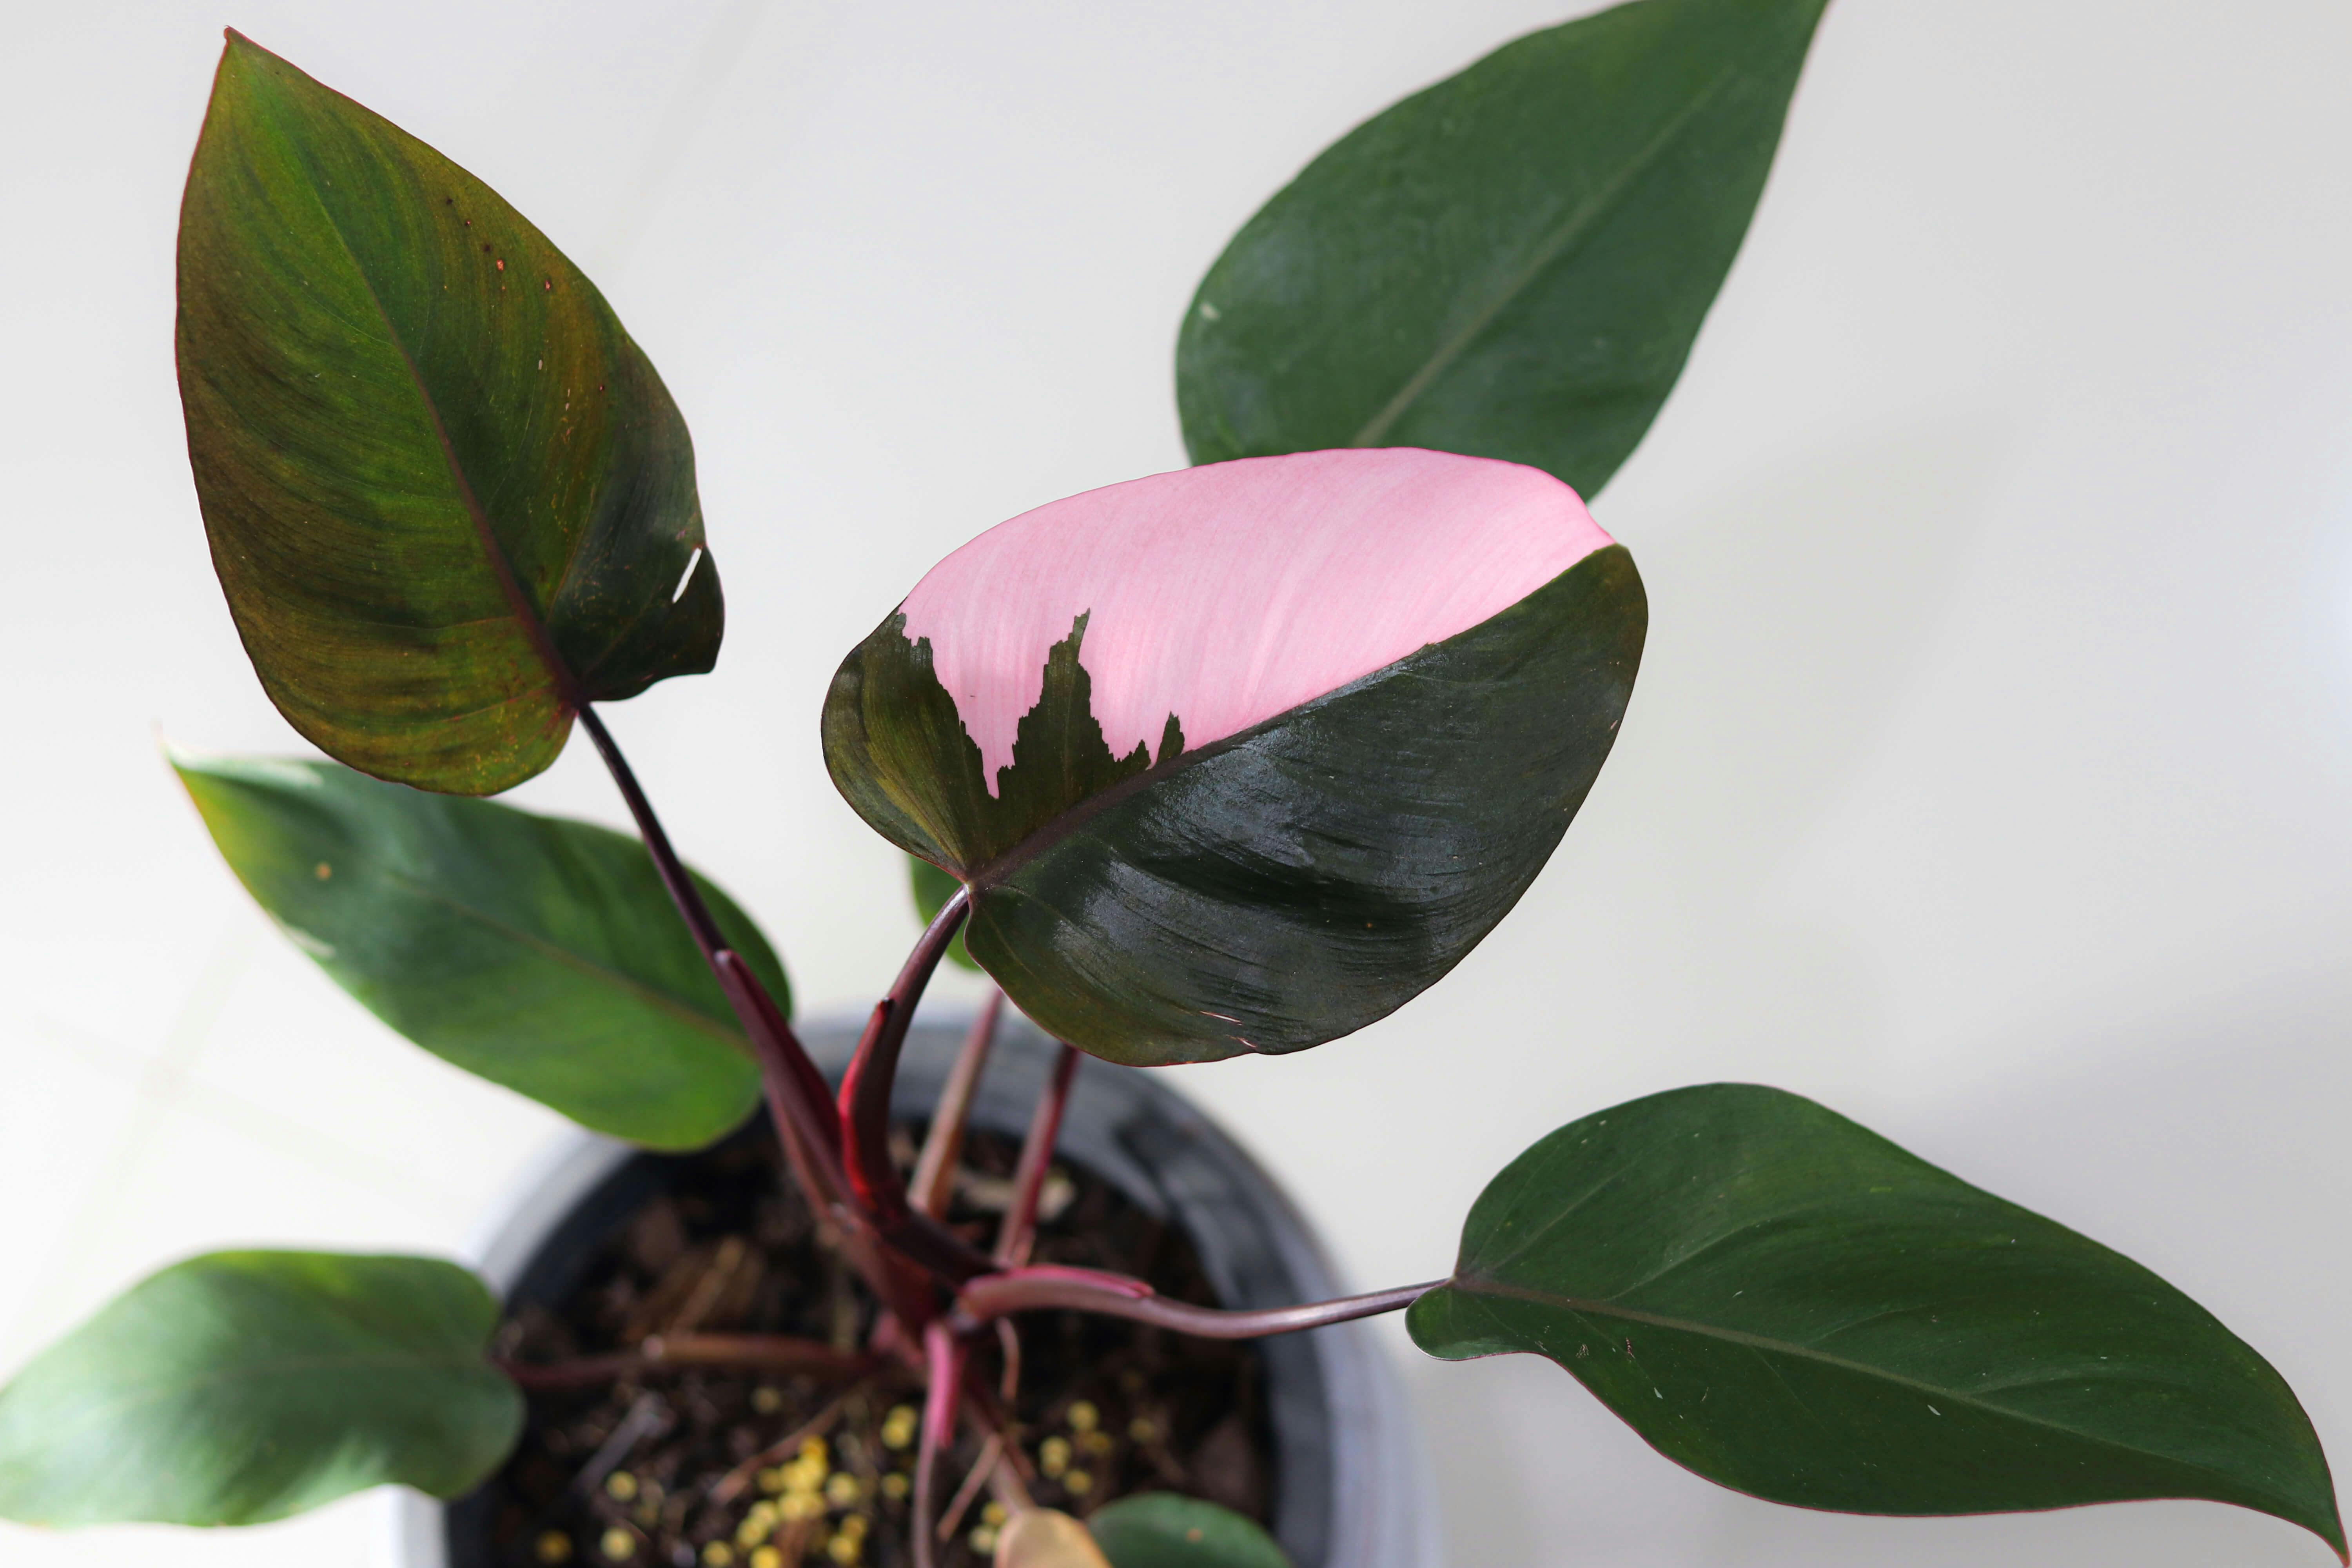 Pink Princess Philodendron Variegated Leaves with green and pink in a gray pot.